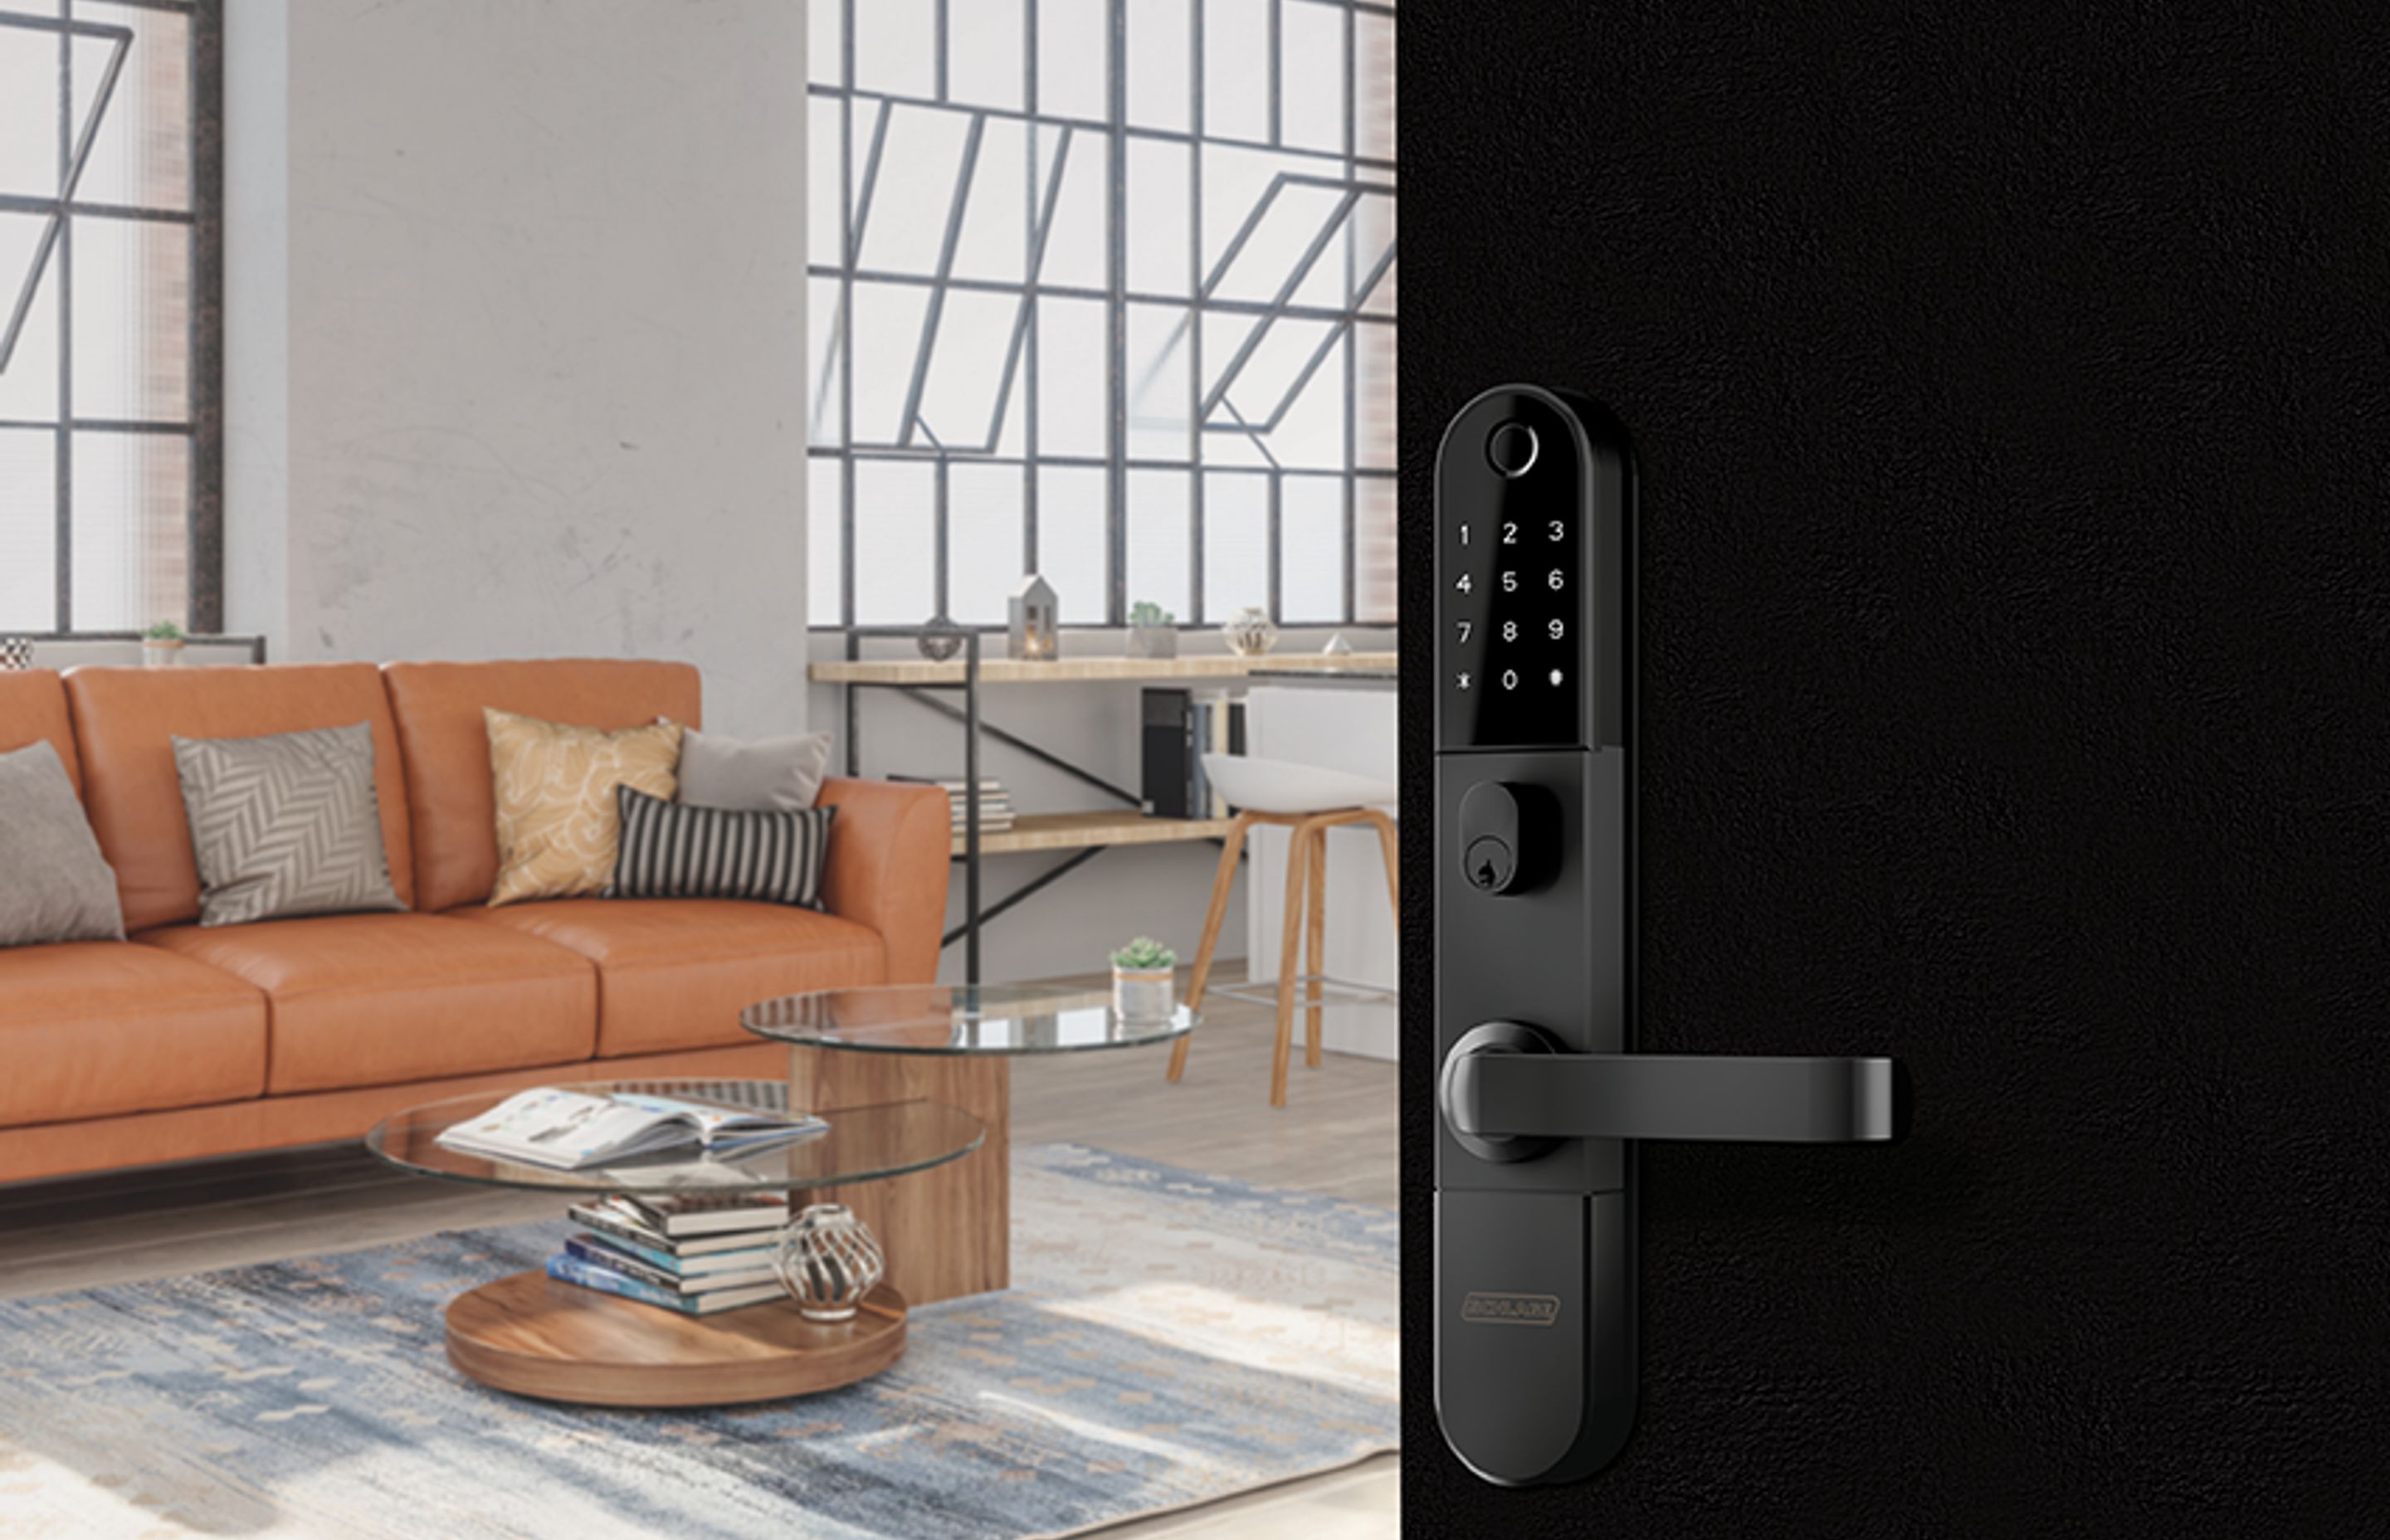 Shown here in matt black, the Schlage Omnia fire-rated smart lock offers five options for operation—keypad, RFID swipe tag, fingerprint scanner, standard key and even remote access via smartphone through the Schlage Breeze app.